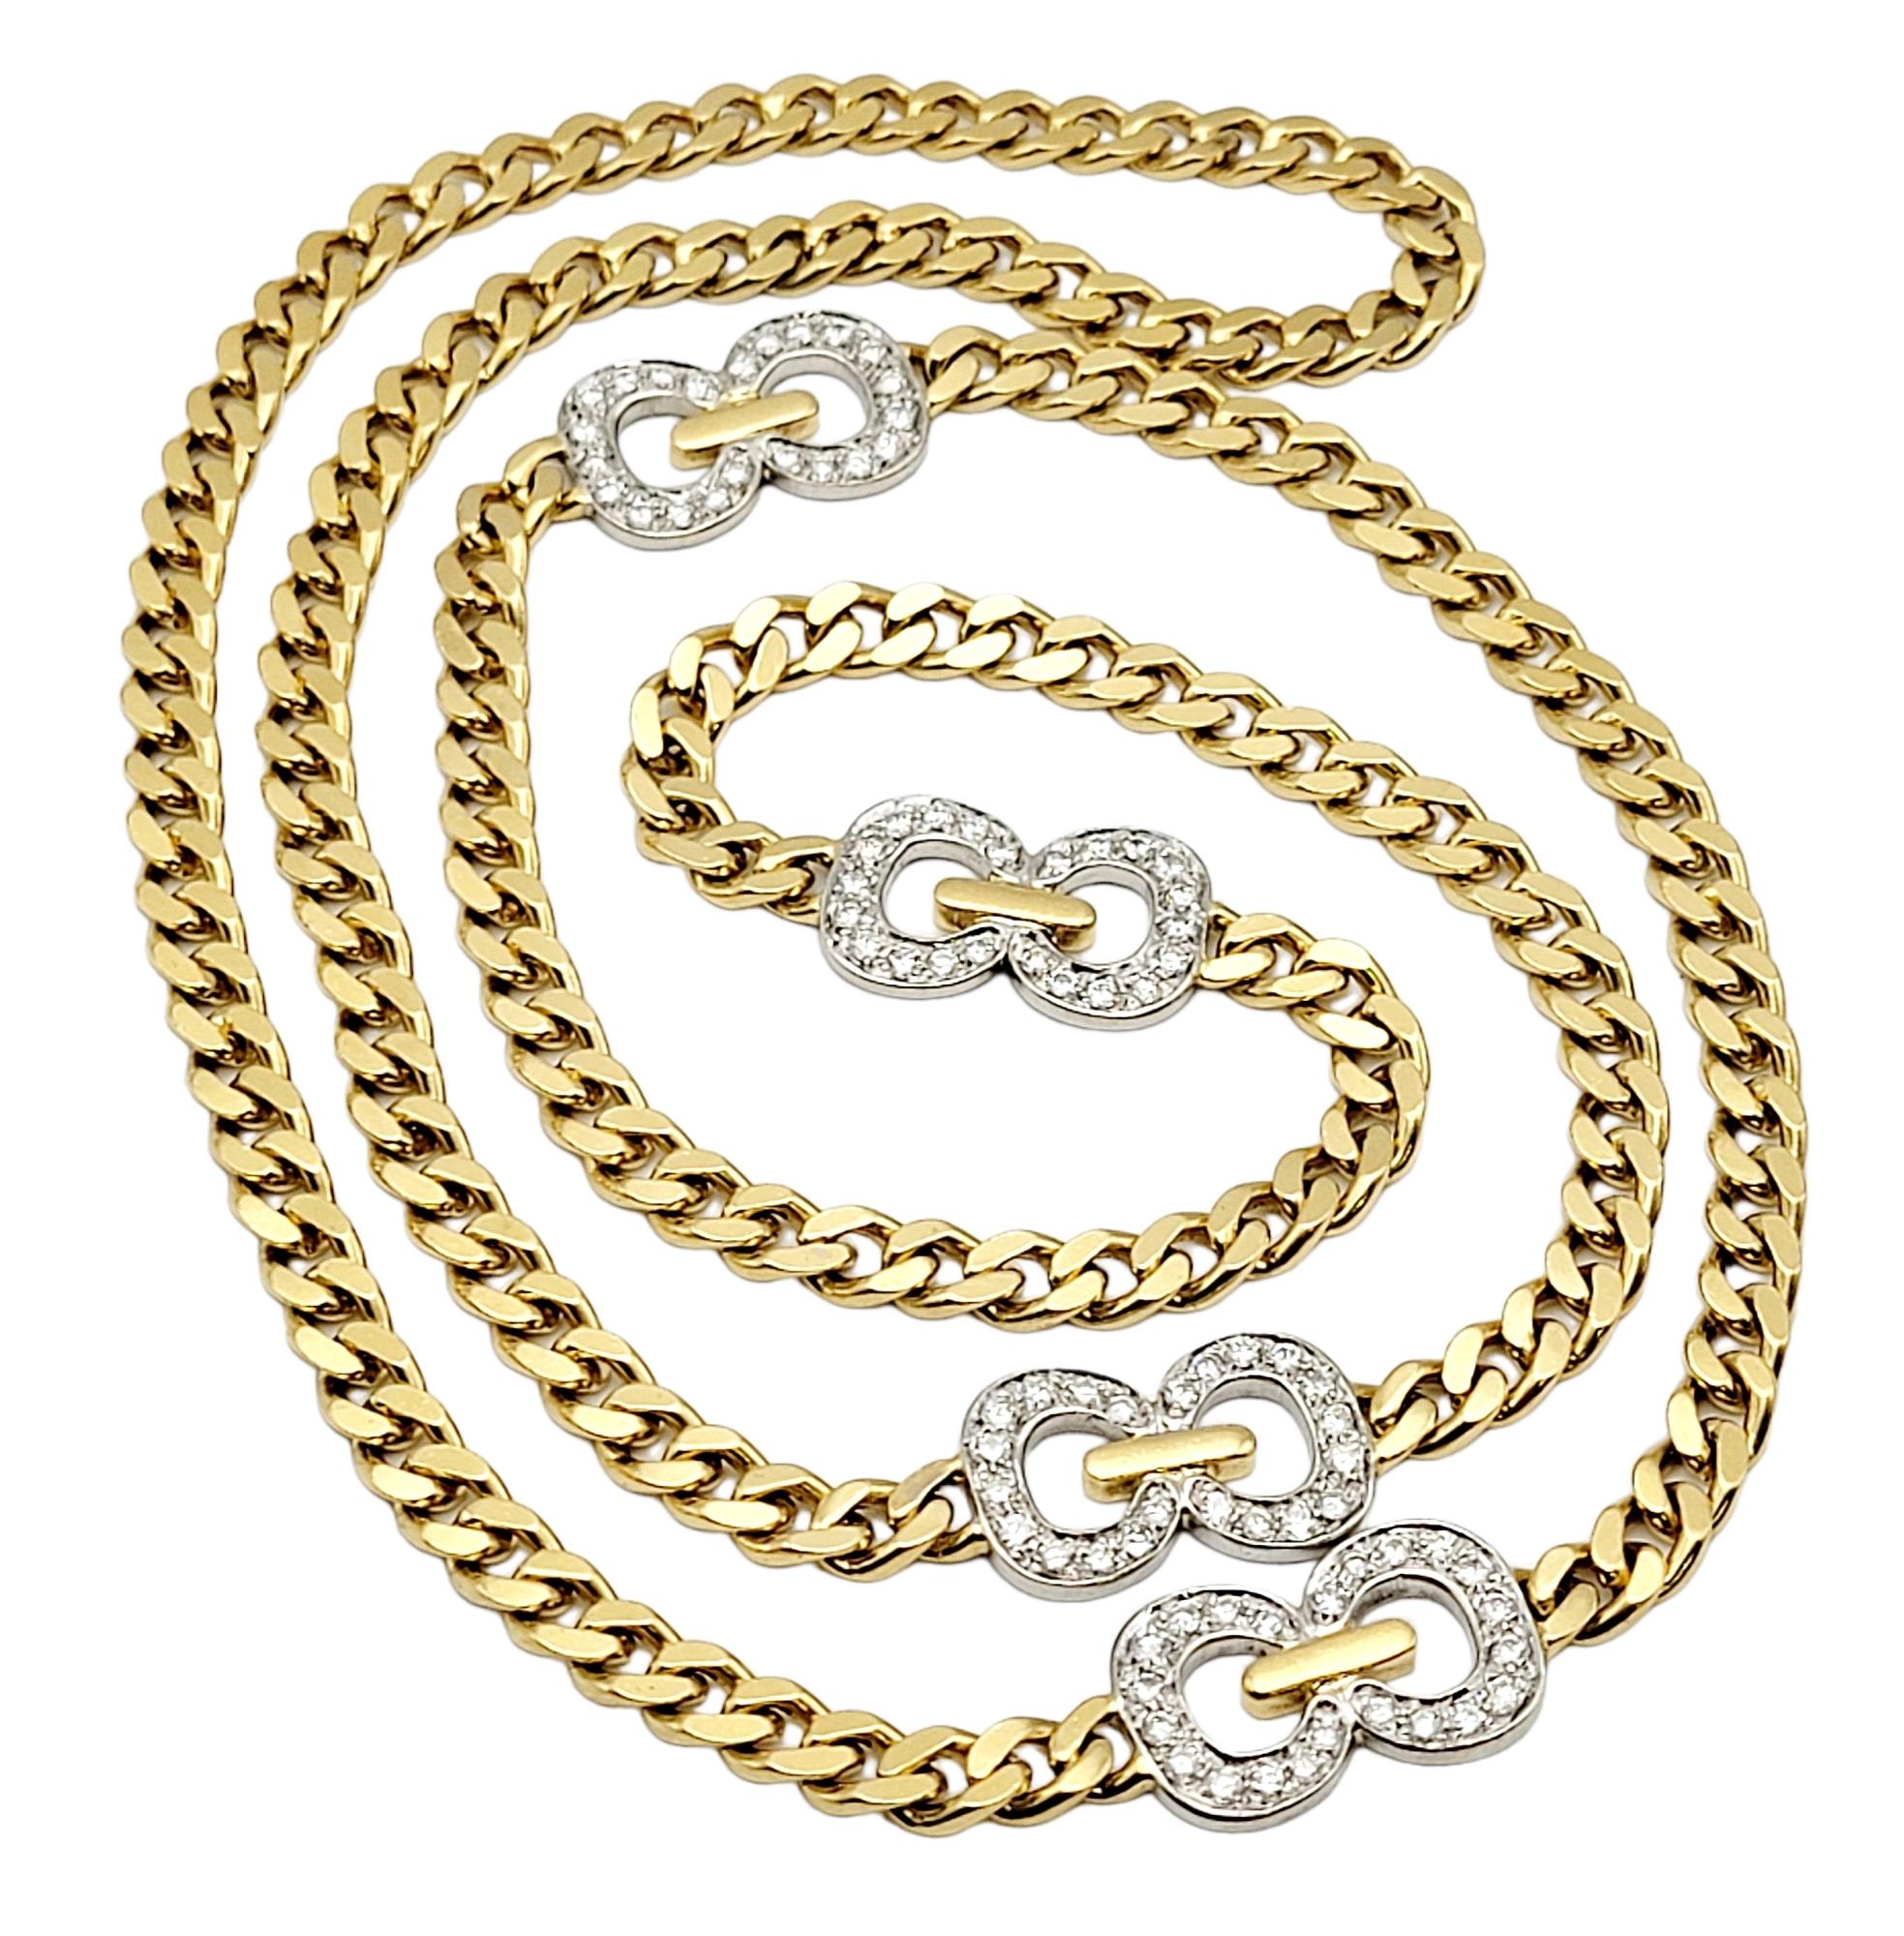 Shown here is modernized, feminine version of the classic Cuban link necklace. Narrower and lighter in style, this elongated piece is accented with stunning natural diamonds, creating a unique and fashionable piece. 
 
This eye-catching necklace